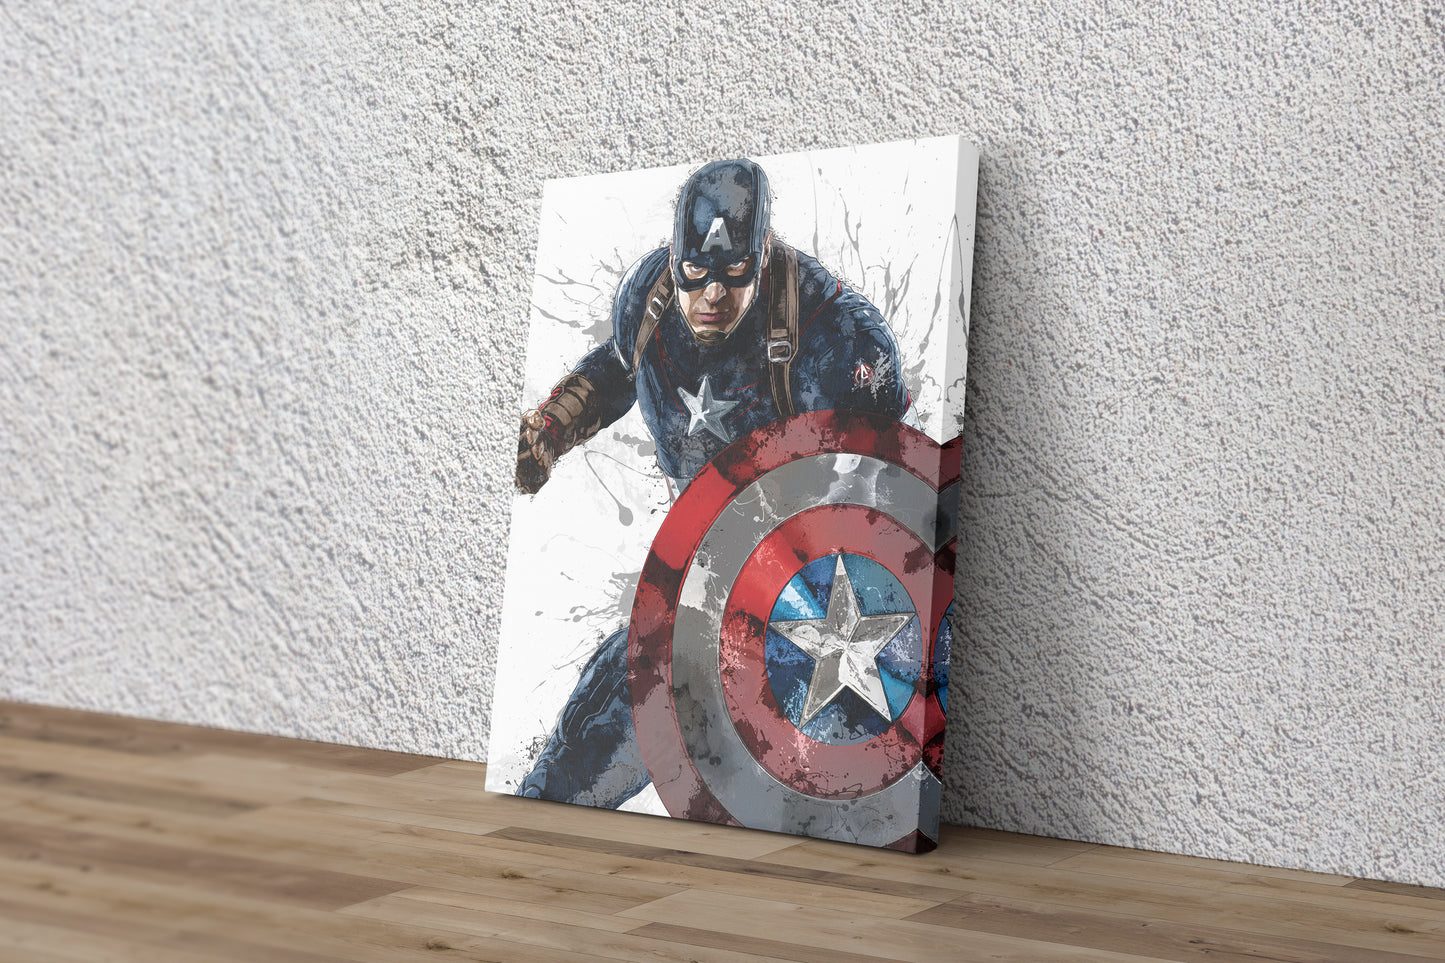 Captain America Poster Marvel Superhero Comics Painting Hand Made Posters Canvas Print Kids Wall Art Man Cave Gift Home Decor